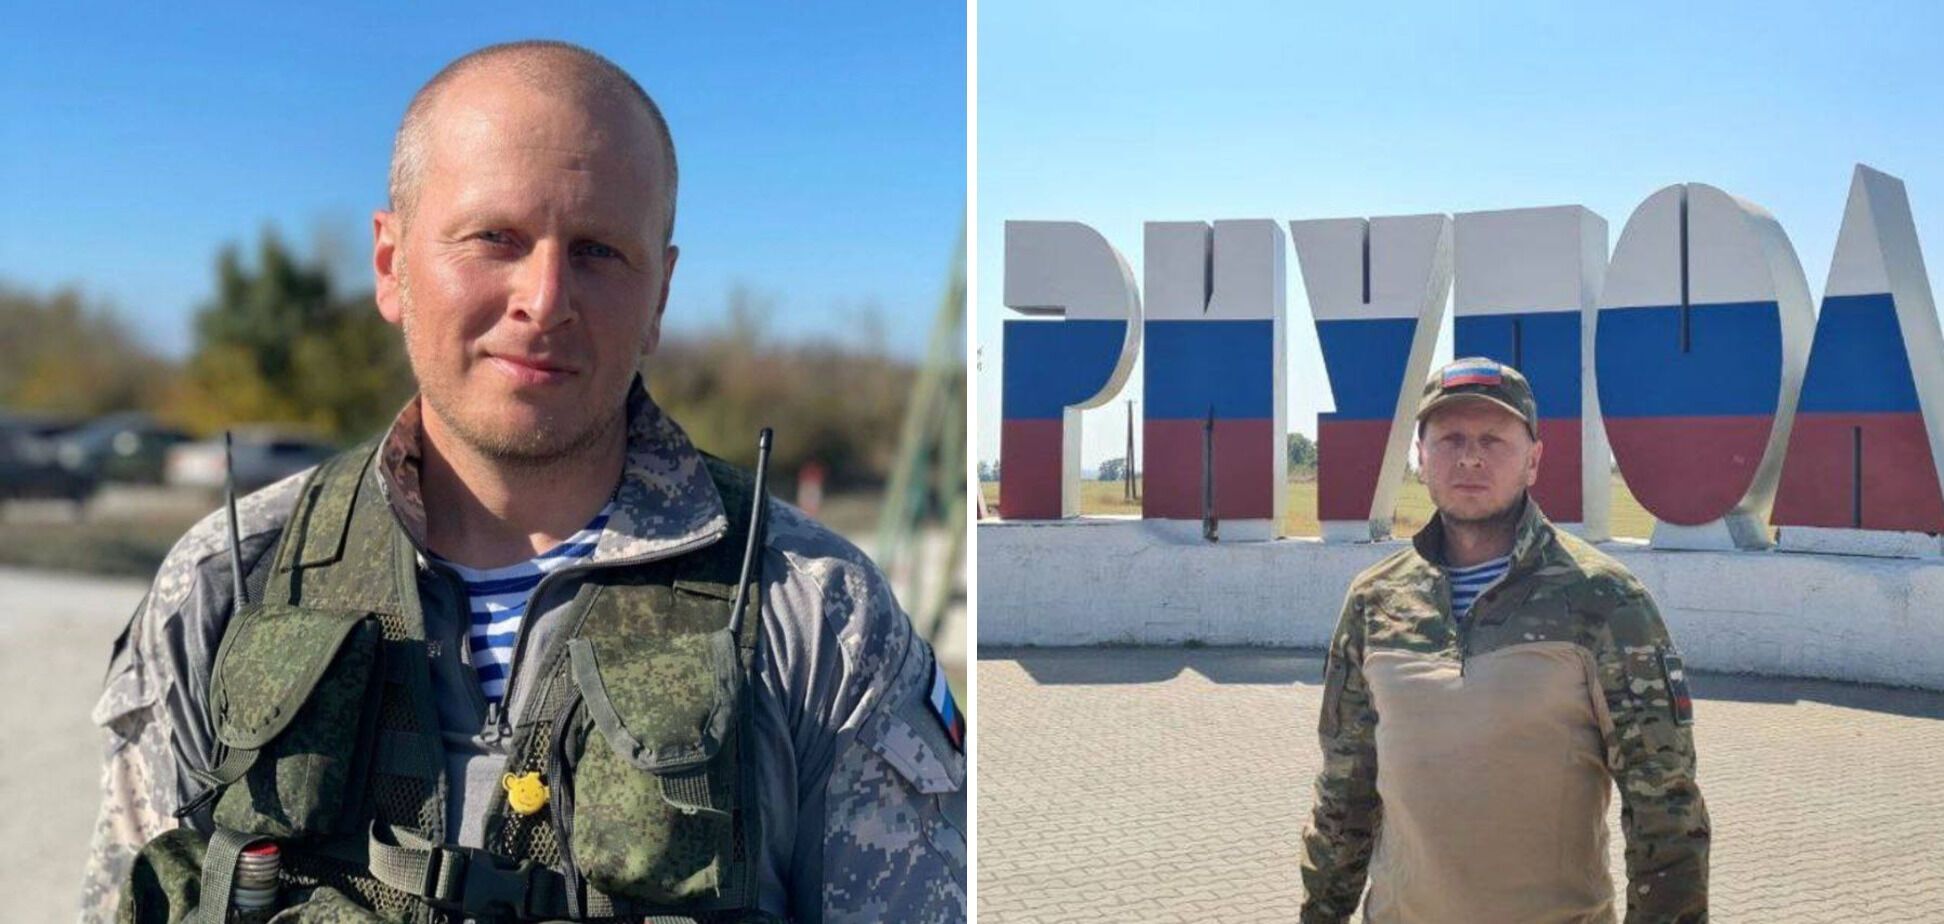 Olympic vice-champion says what was in the pockets of dead Russian soldiers who attacked Ukraine